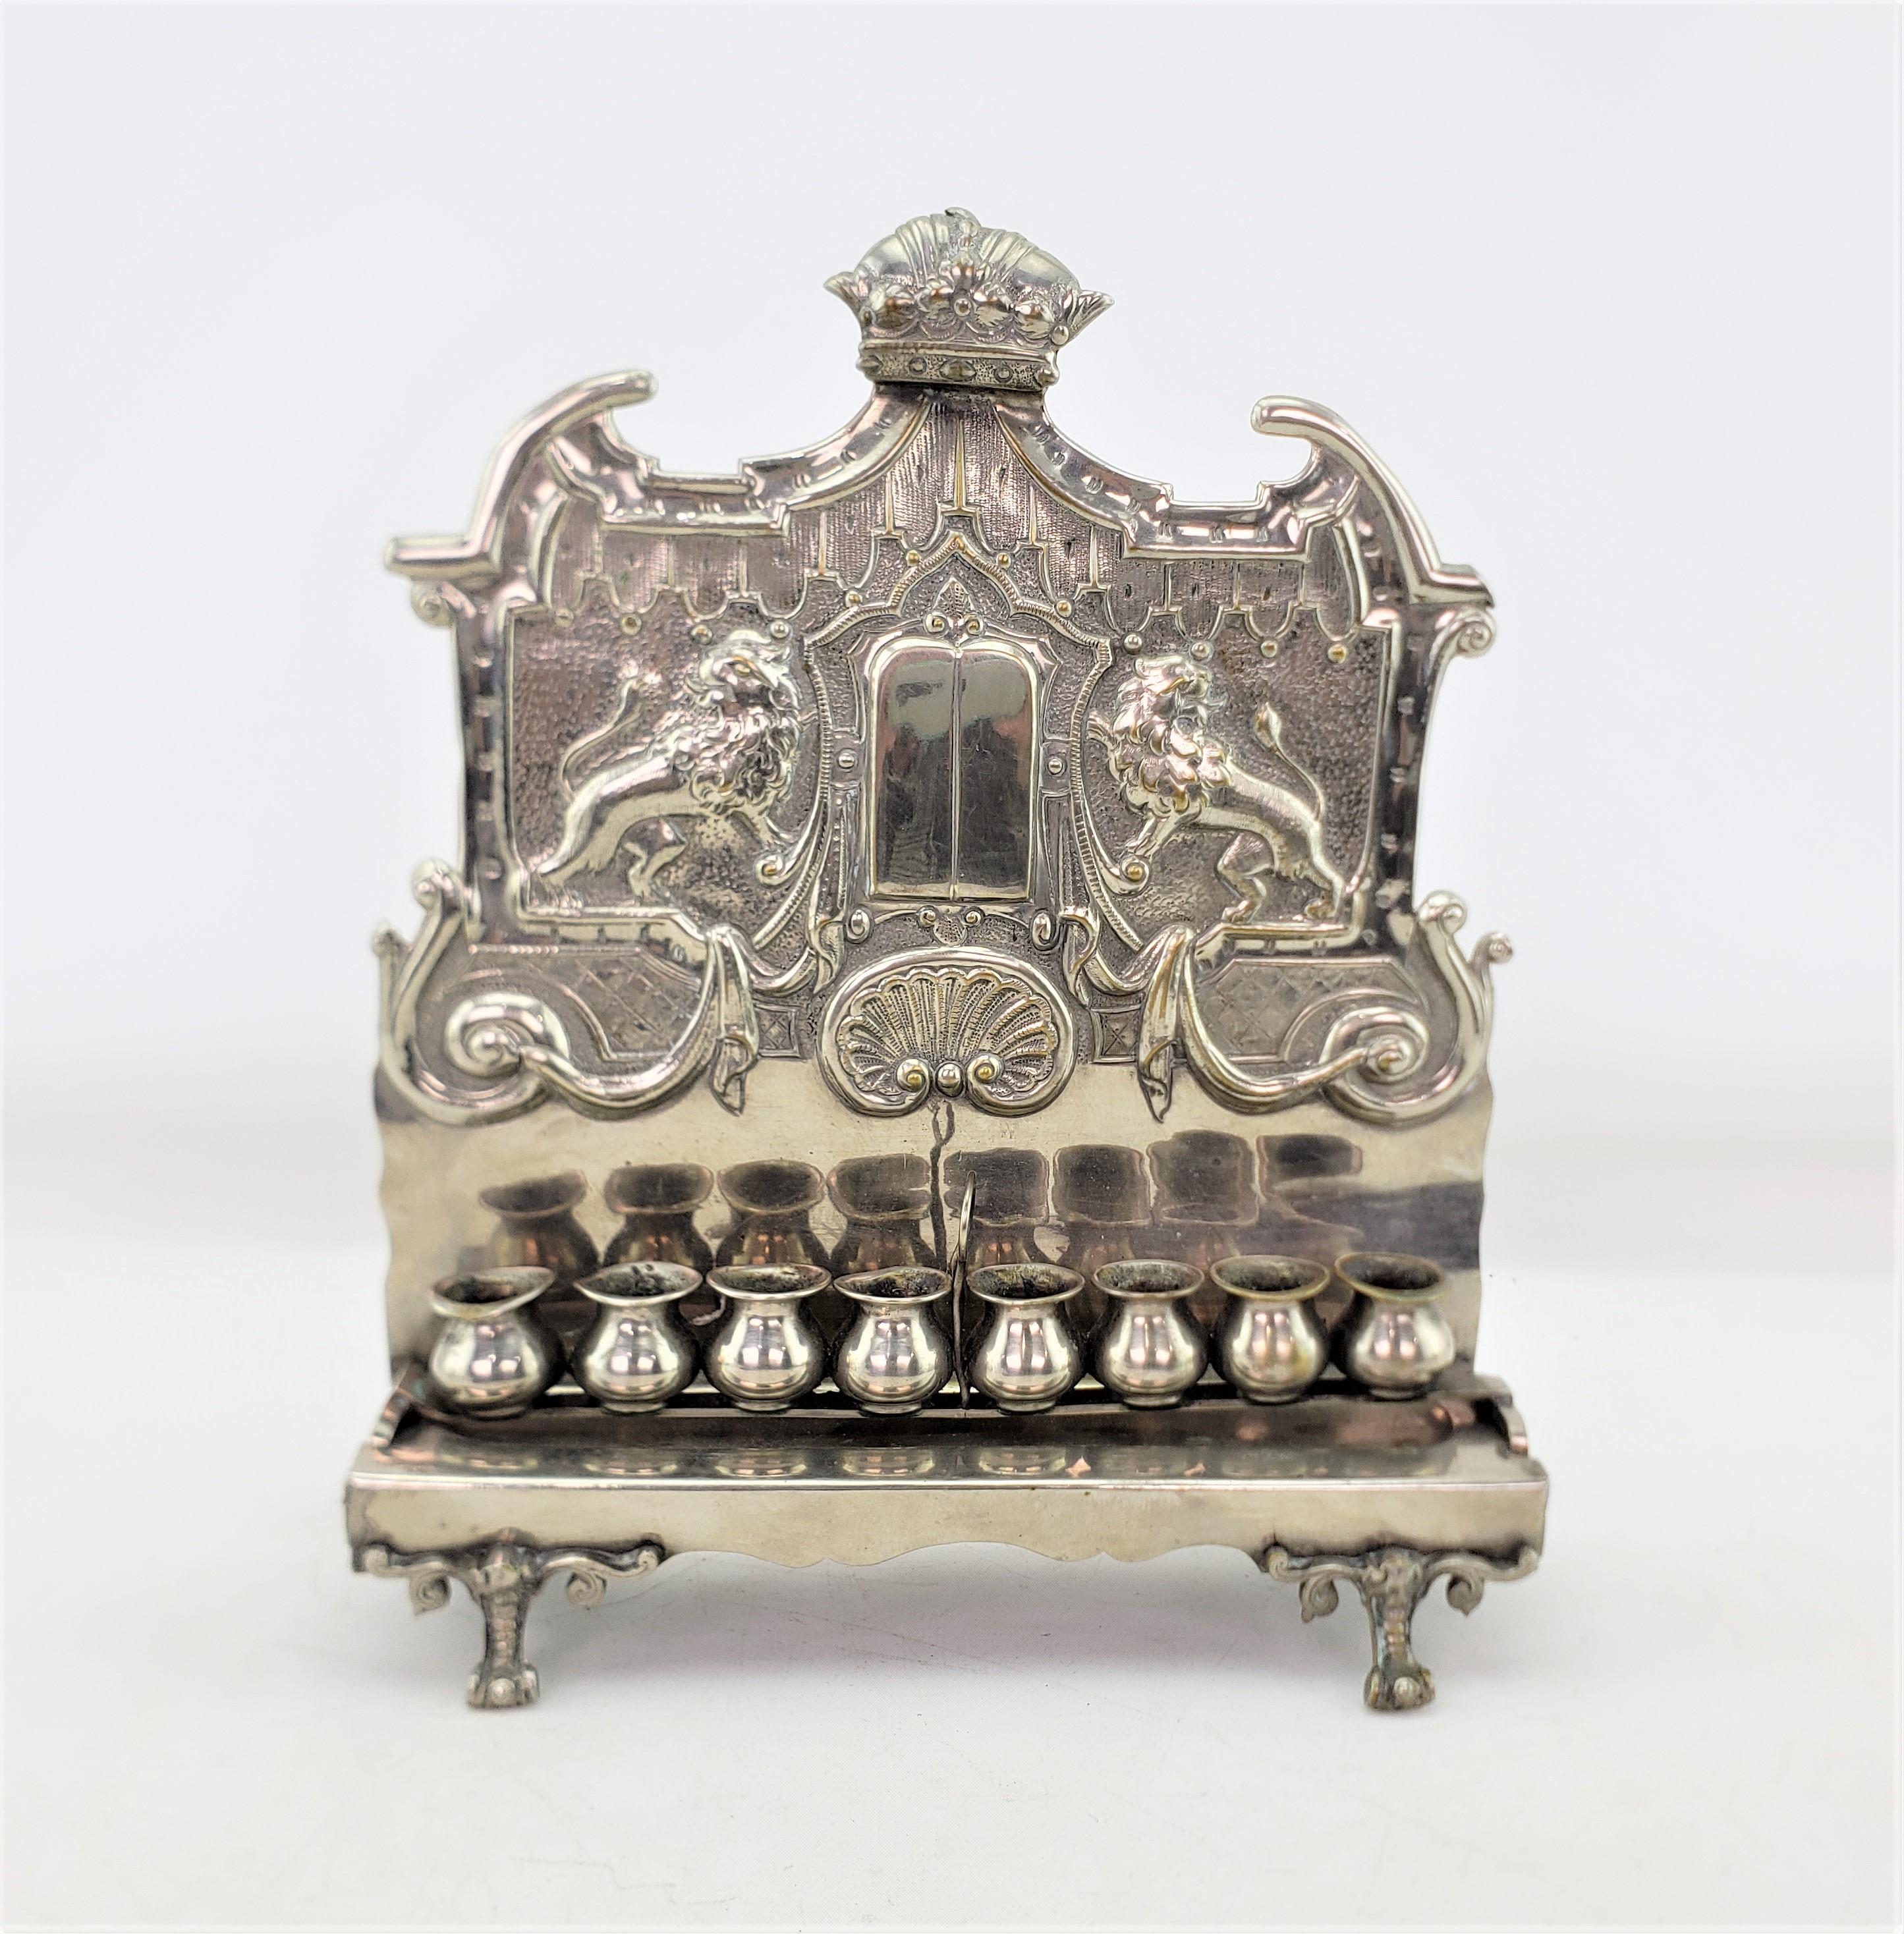 This antique menorah is unsigned, but presumed to have originated from Europe and date to approximately 1920 and done in a Victorian style. This menorah is composed of stamped metal with a silver platef finish with two rearing lions on the back